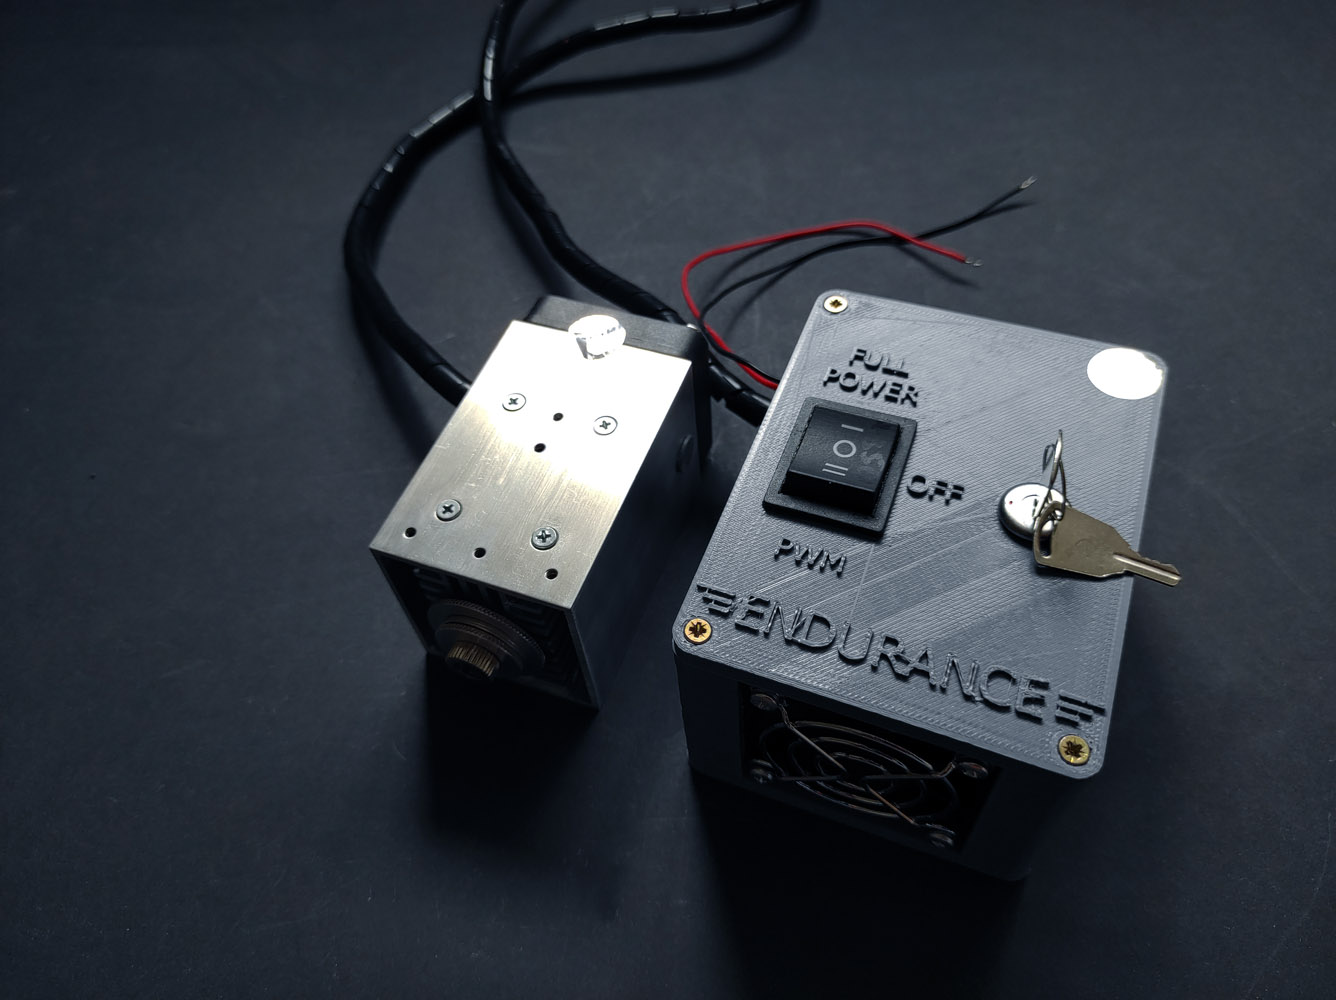 The Endurance 10 Watt (10000 mW) laser “Invincible” module (add-on) with 445 nm wavelength for any 3D printer / CNC machine